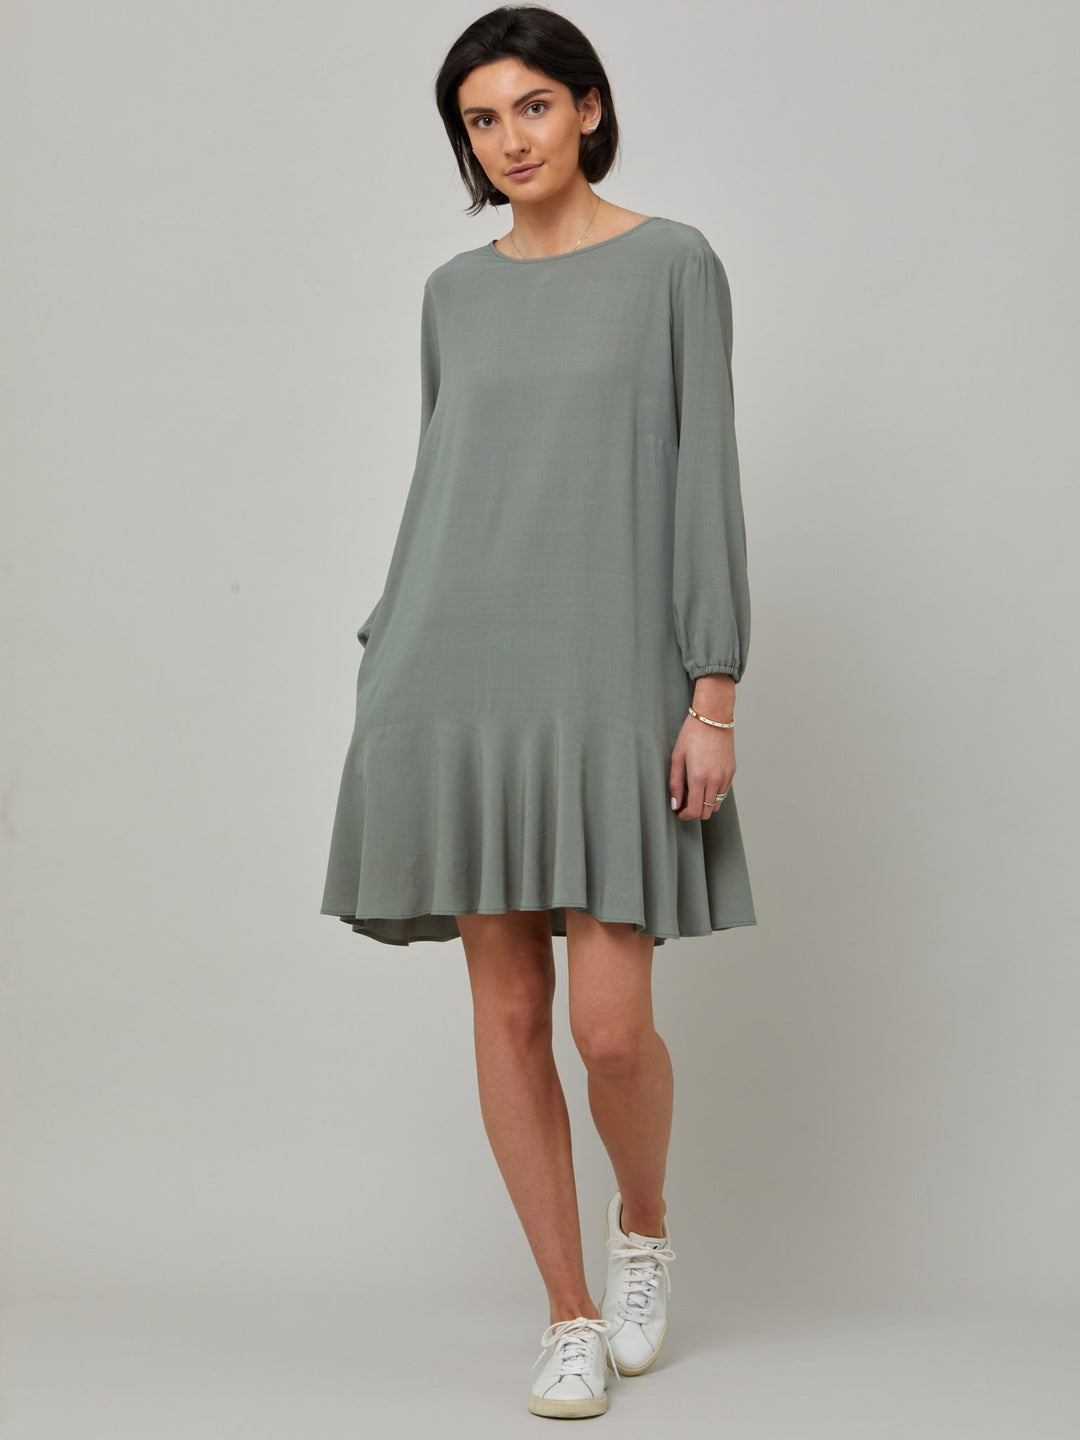 front picture of model wearing Sheila, a great everyday dress. Crafted in our fluid lichen green viscose crepe. A flirty knee-grazing shift dress with a soft elasticated cuff sleeve that falls to a deep frill hem with a jewel neckline and key-hole back detail. For everyday comfort style with trainers. Elevate your mood with this fun piece.